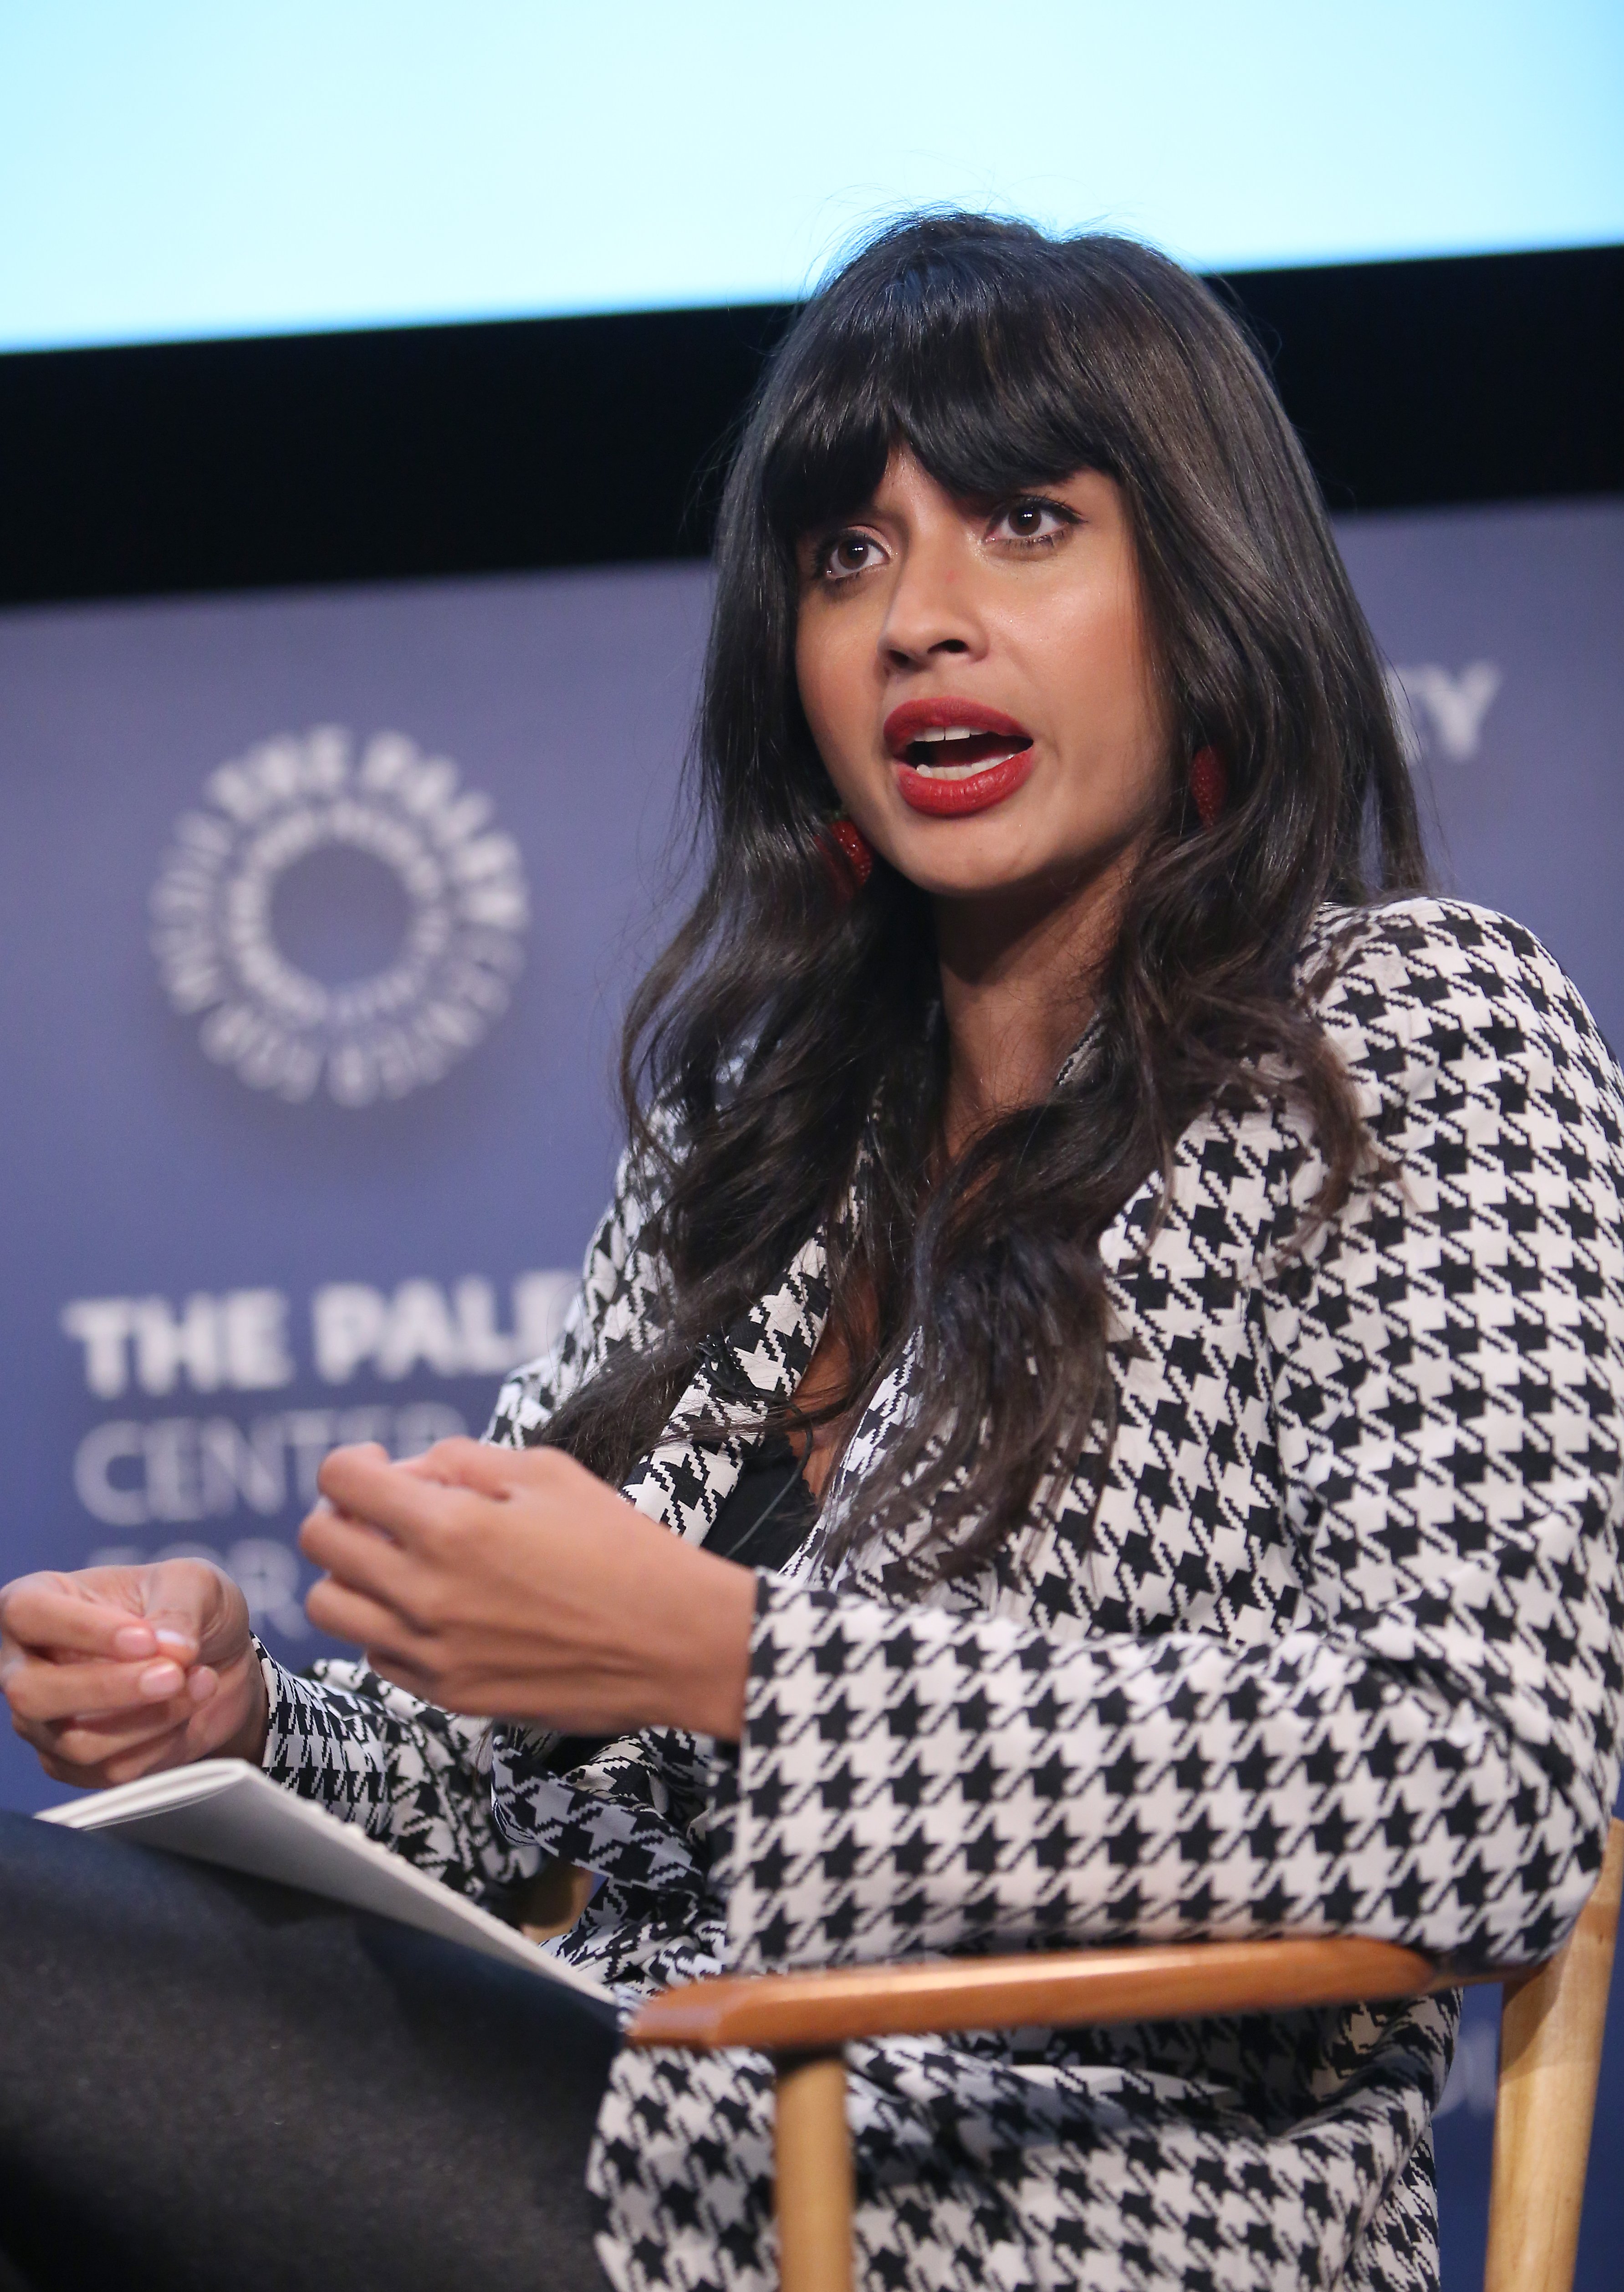 Jameela Jamil, actress on "The Good Place" | Photo: Getty Images